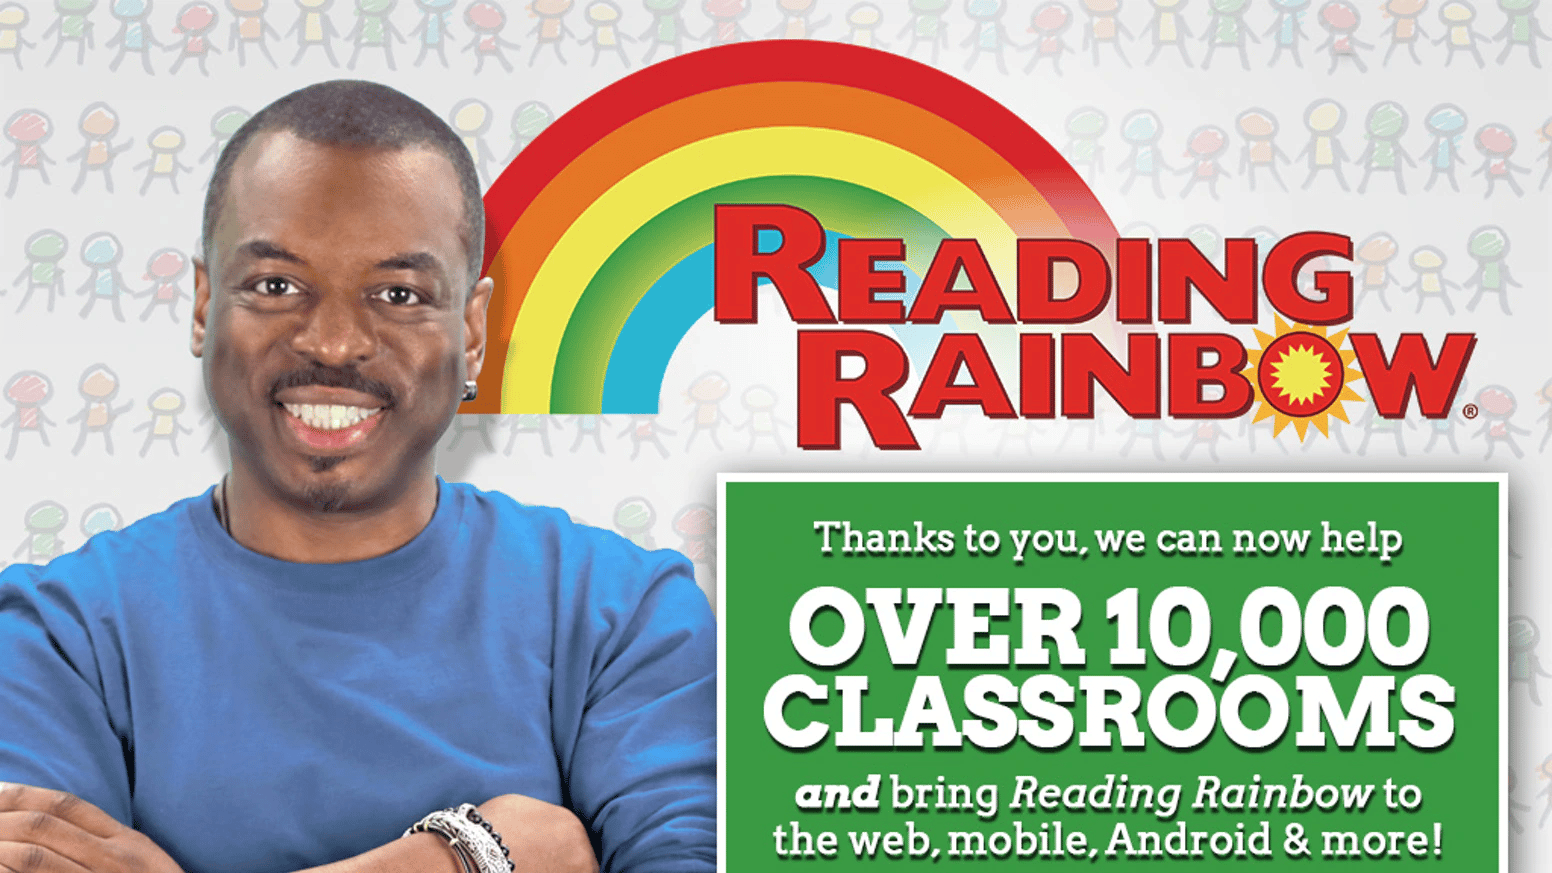 Bring Reading Rainbow Back is one of the most successful kickstarter campaigns